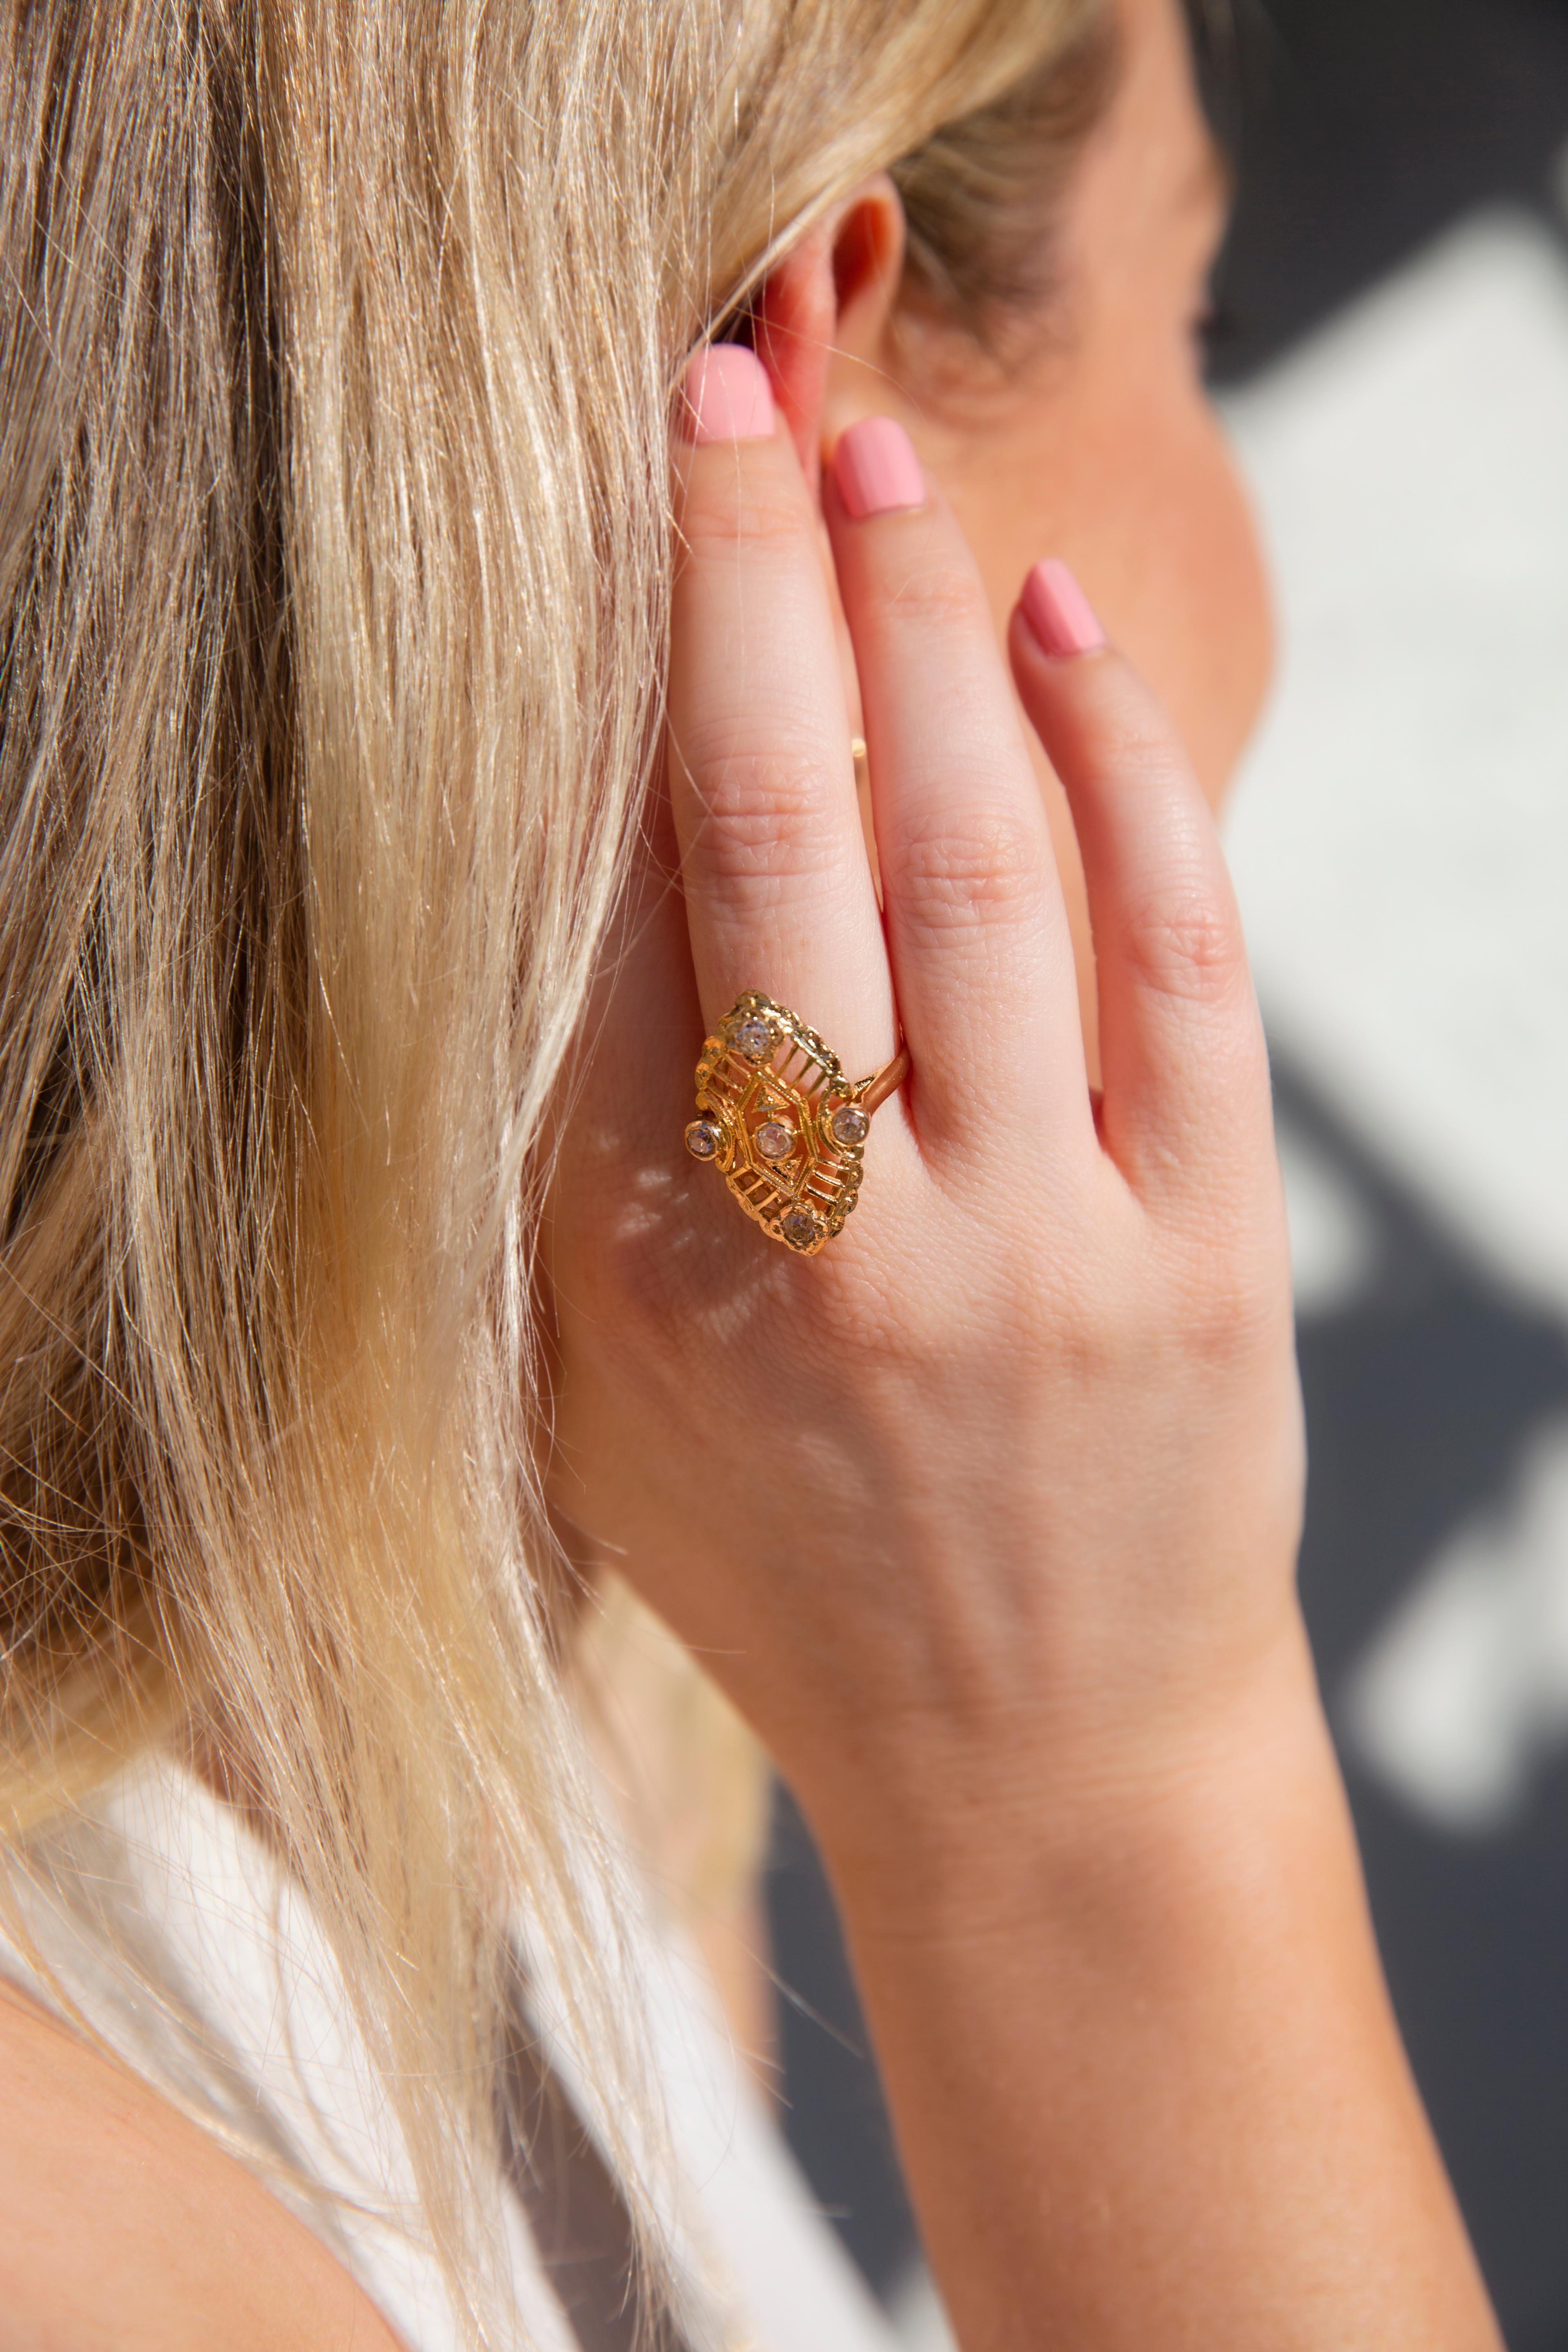 Intricately crafted in 18 carat gold, The Marcia Ring is a trip through the early years of the last century. Her geometric lines form a warrior's shield embellished with shining diamonds. She is a jewel for the one who is unafraid to stand out.

The